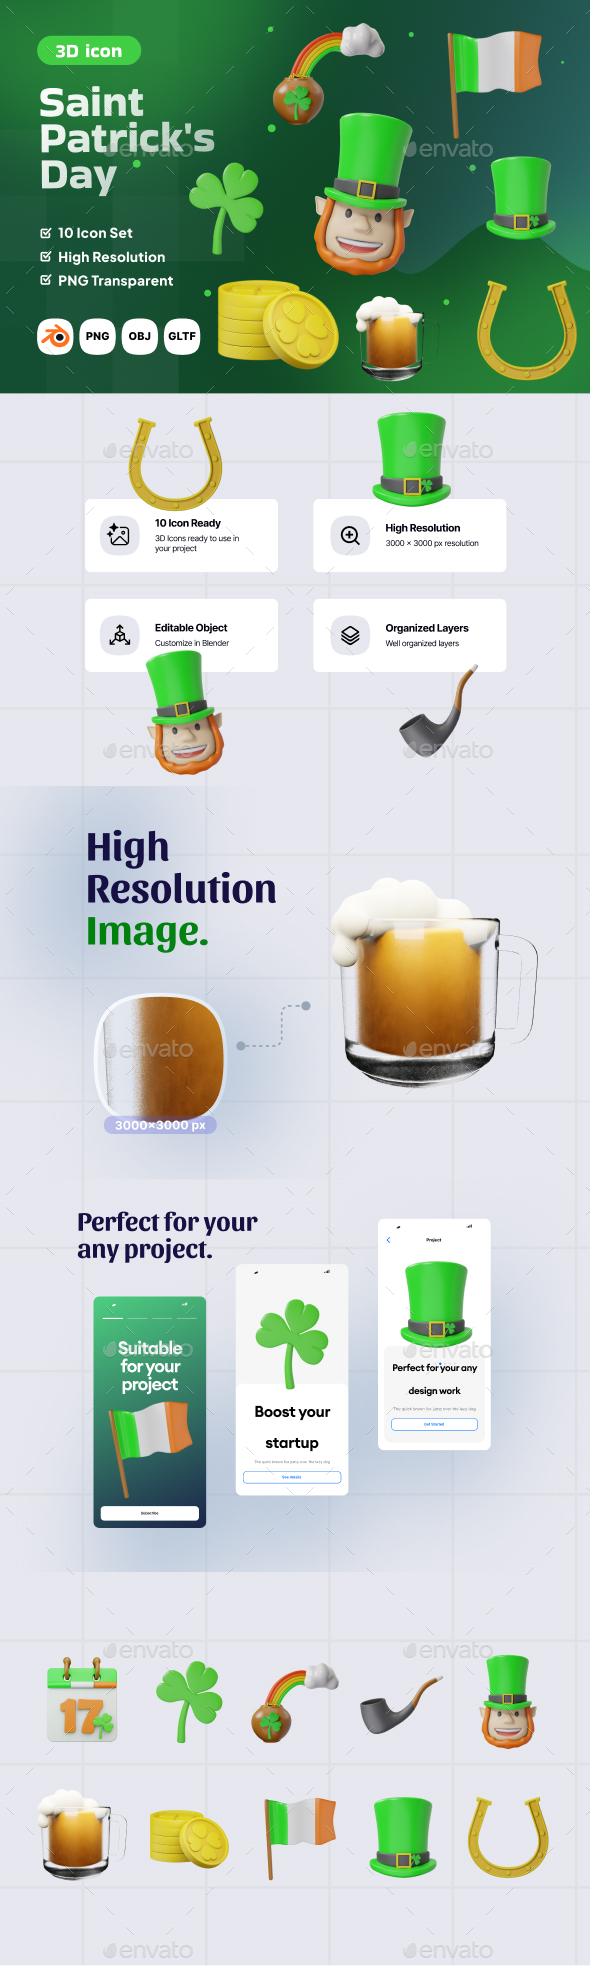 [DOWNLOAD]St Patrick 3D Icon Pack